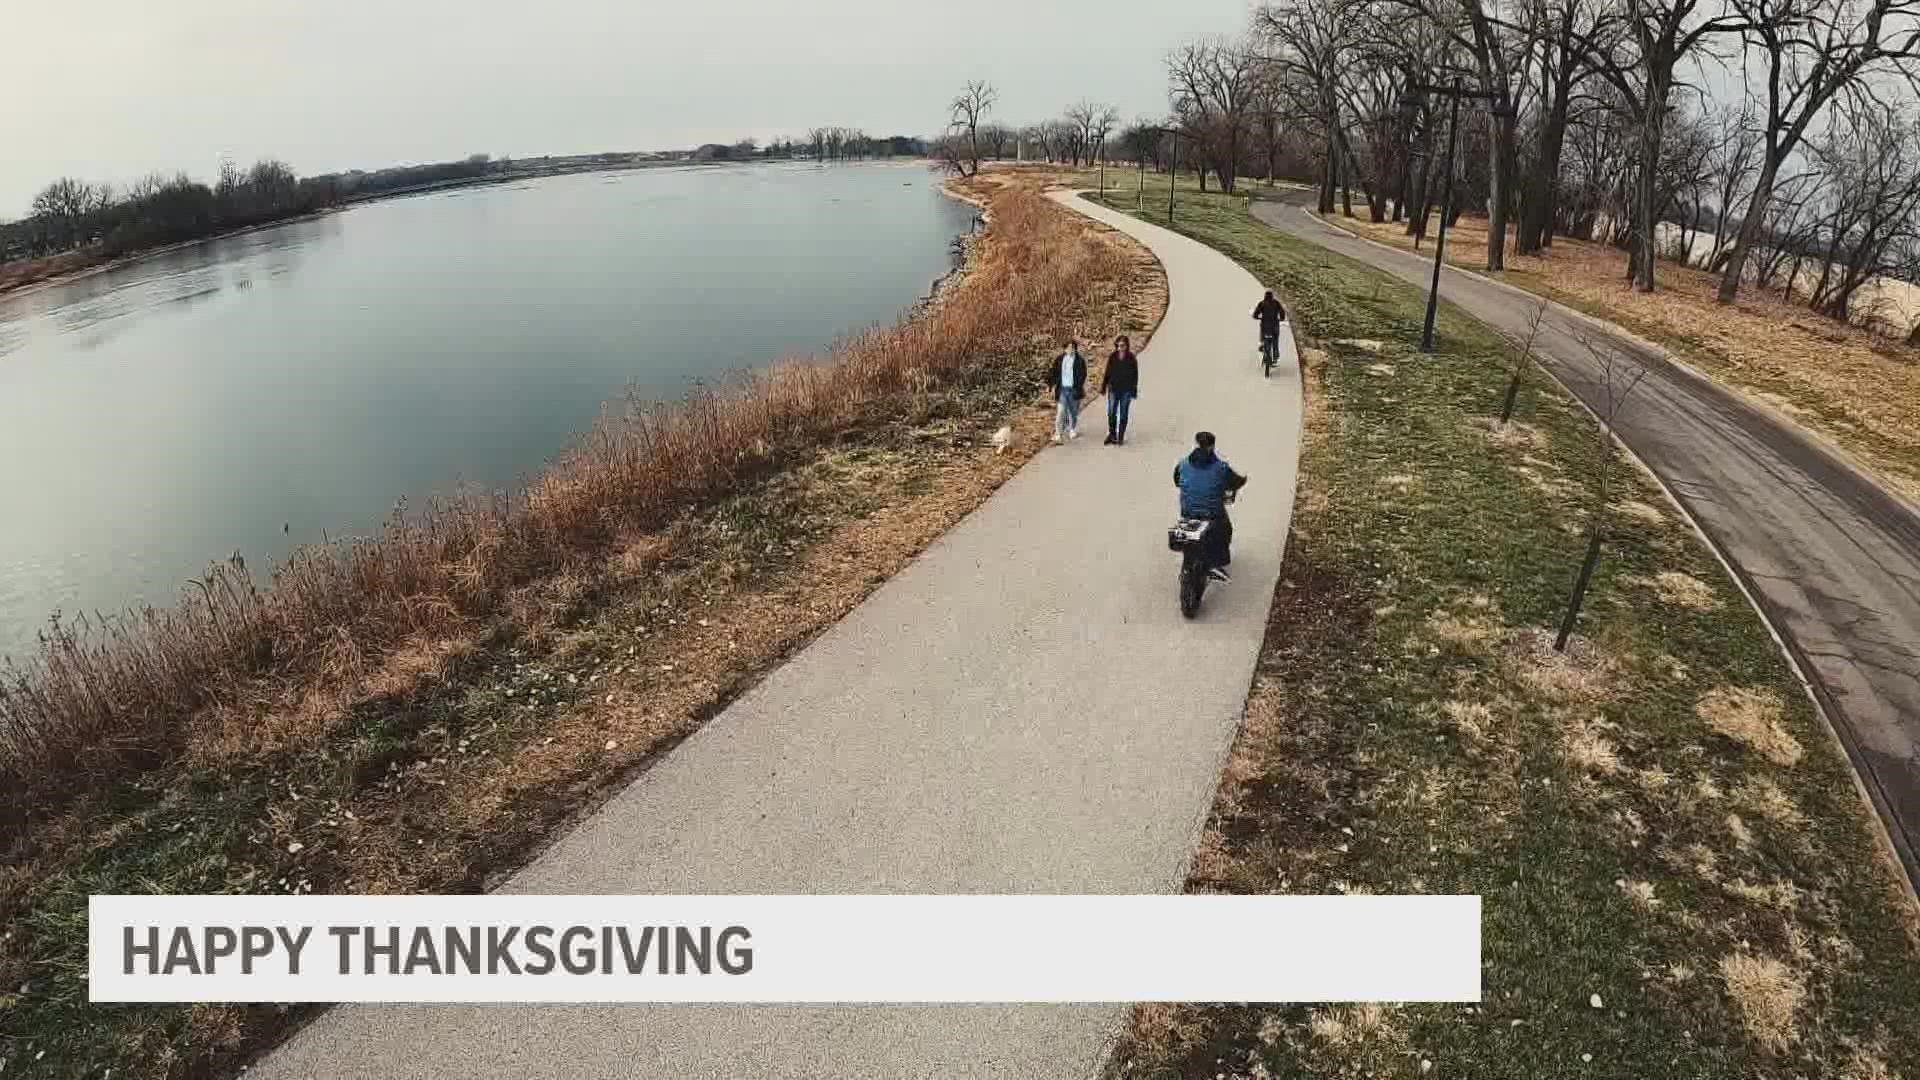 Chief photographer Don Schmith asked people at Gray's Lake what they were thankful for this year and what they were looking forward to about the holiday.